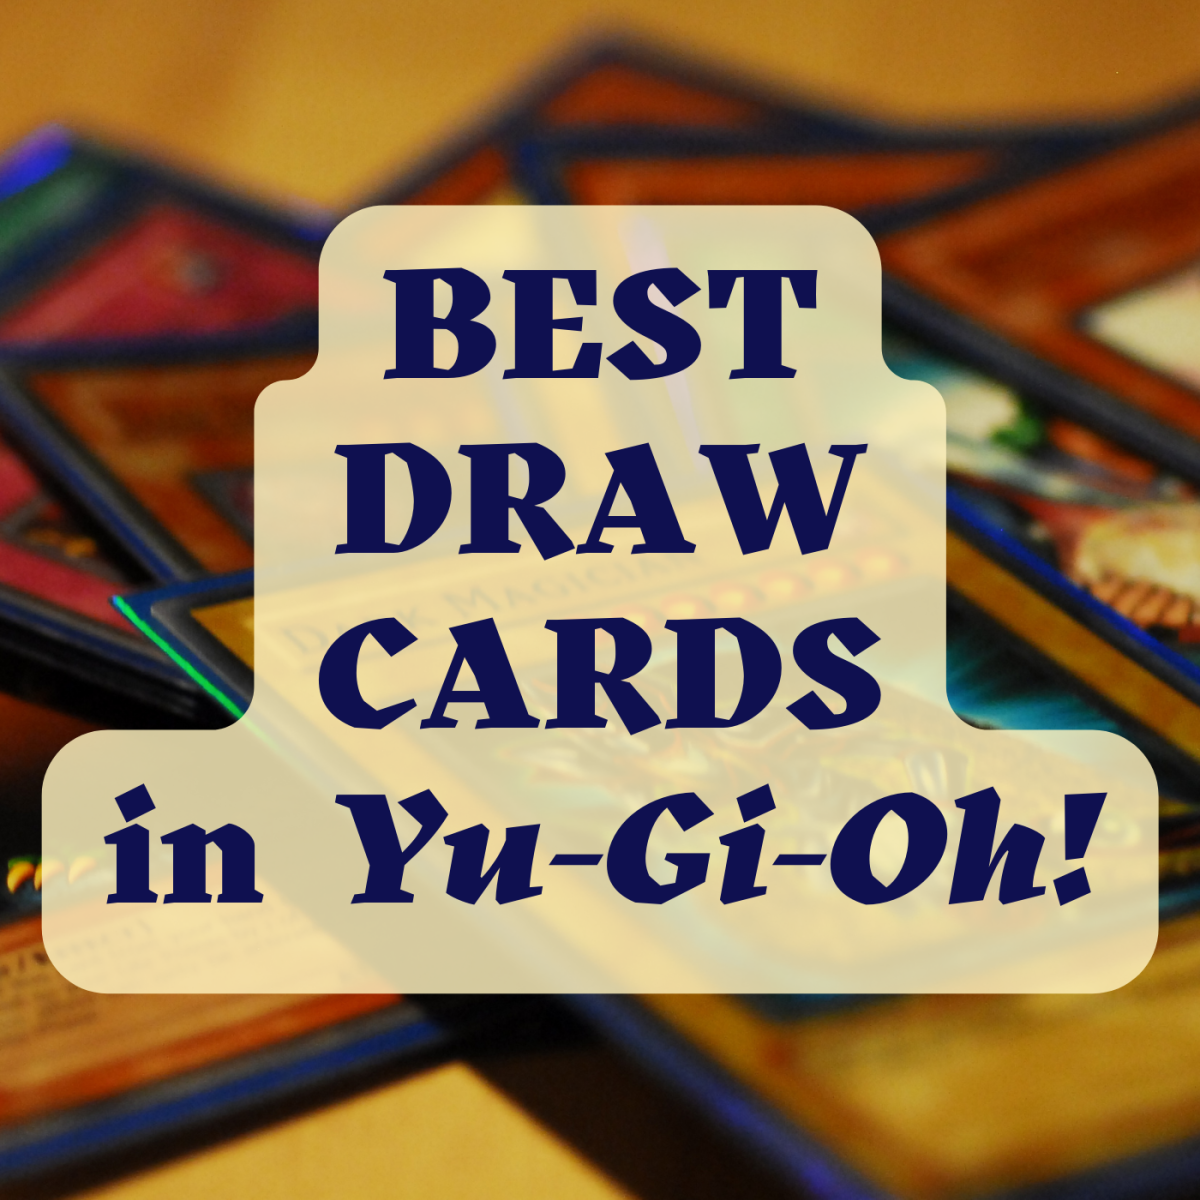 Check out the 10 best cards that give you bonus draws in "Yu-Gi-Oh!"